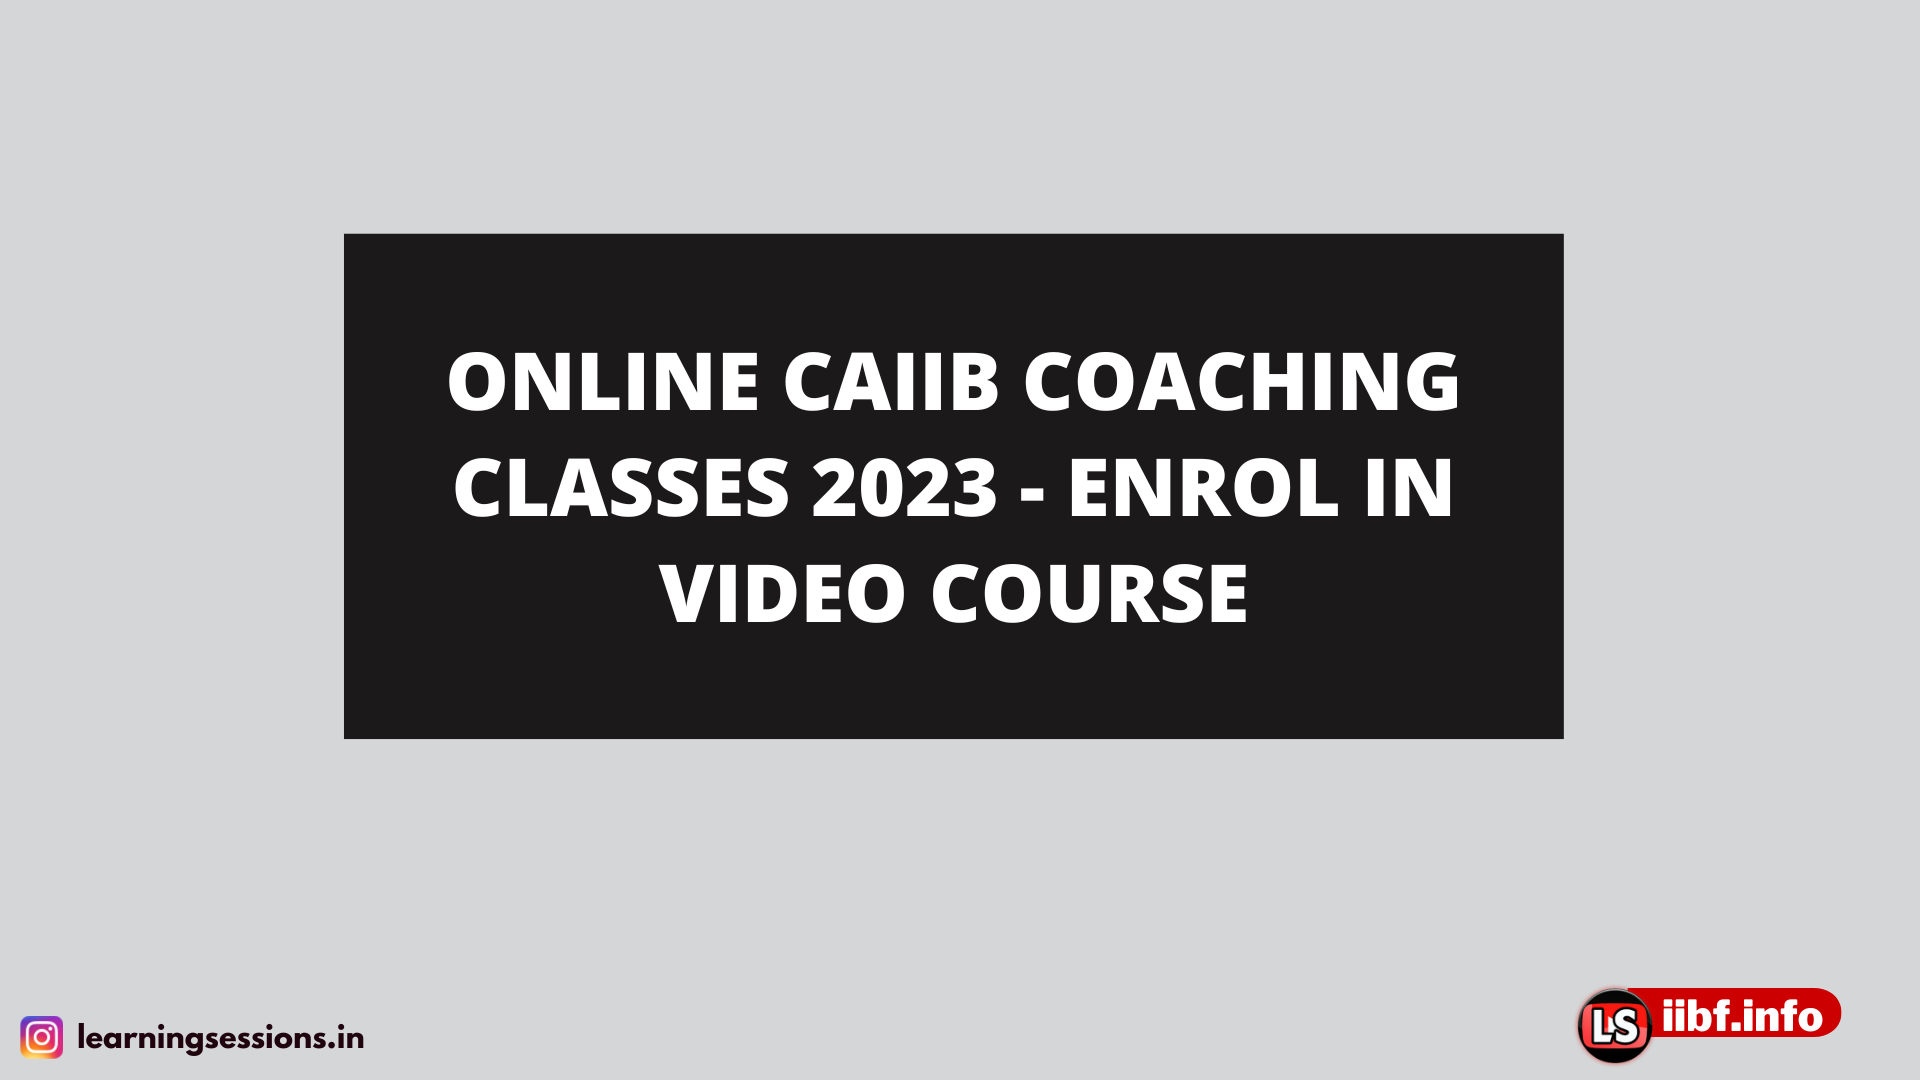 ONLINE CAIIB COACHING CLASSES 2022, ENROL IN VIDEO COURSE